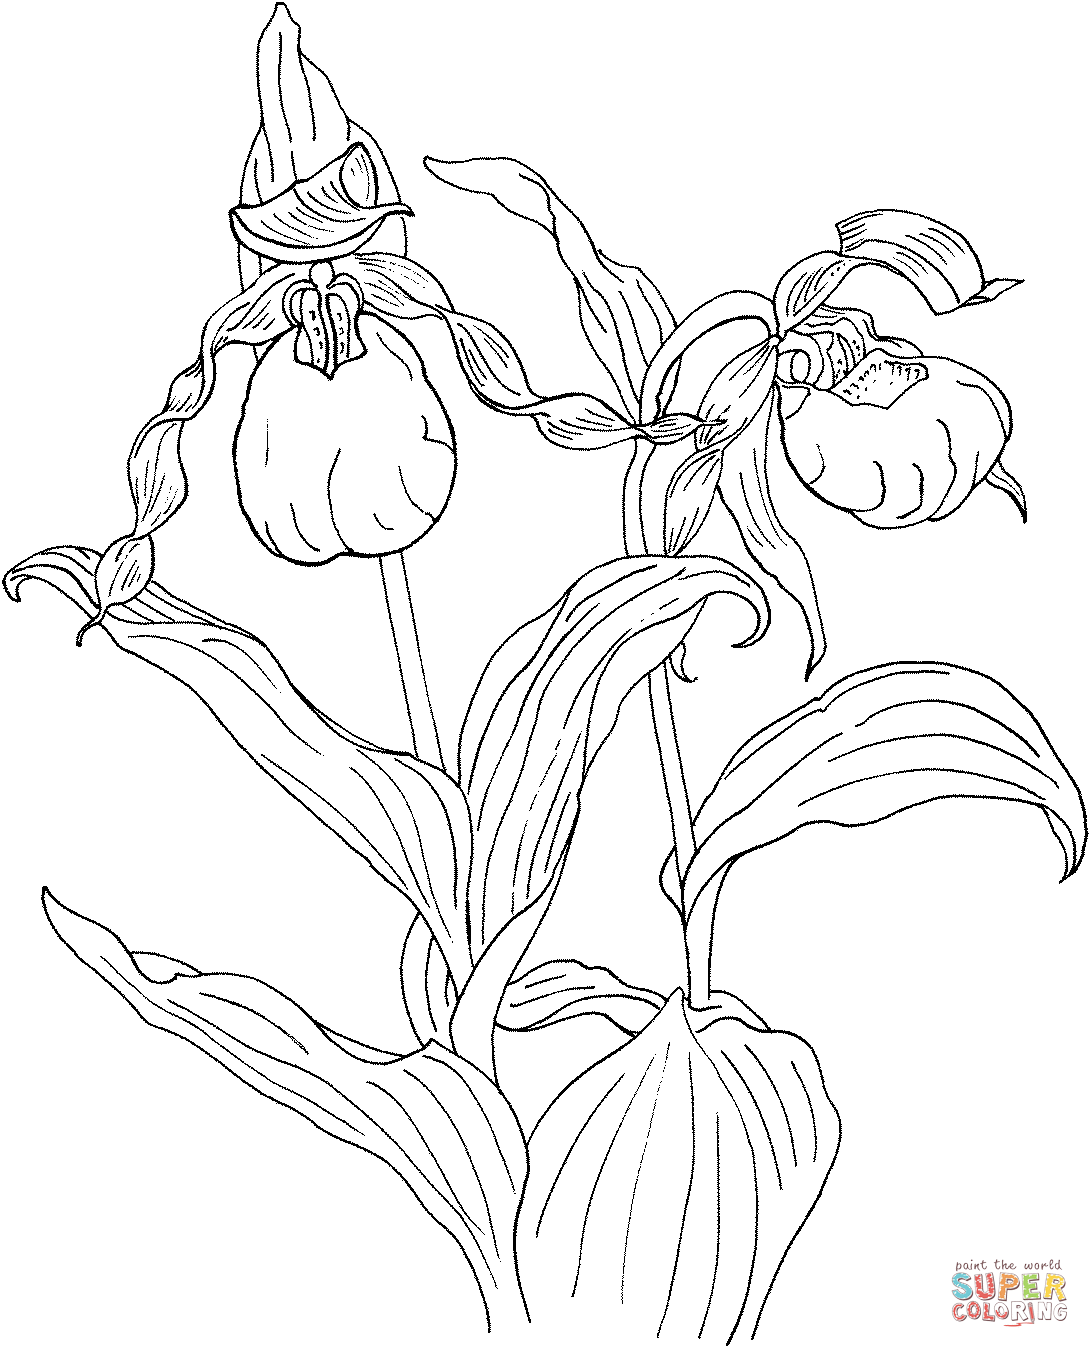 Cypripedium Calceolus Is A Lady's Slipper Orchid Coloring Pages